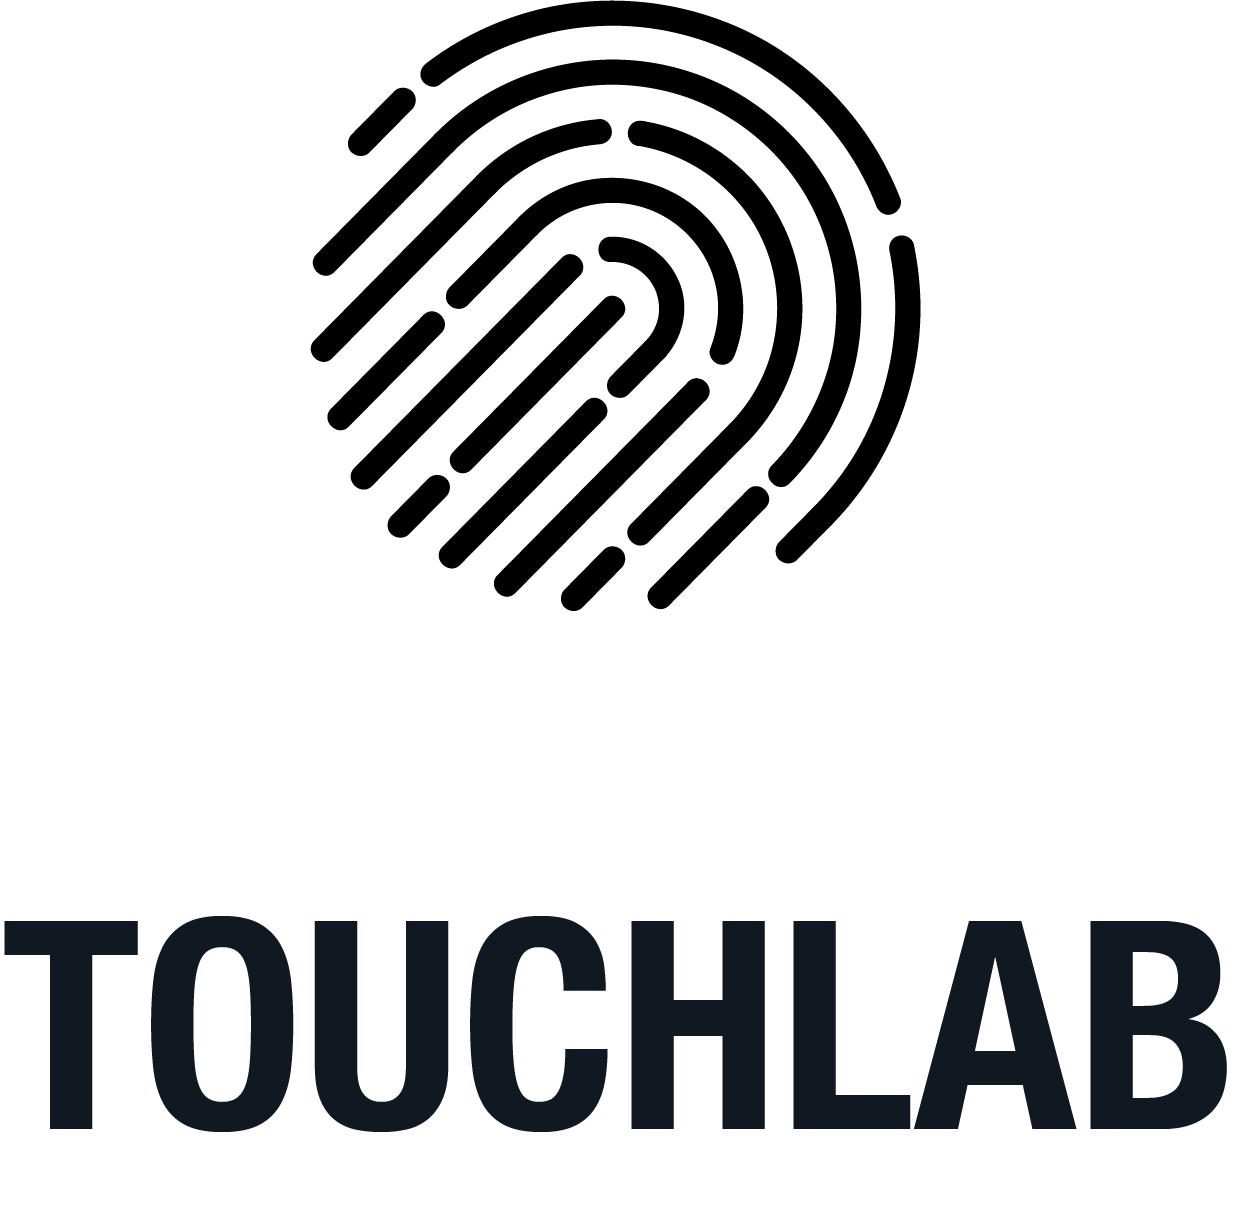 Winner Image - Touchlab Limited